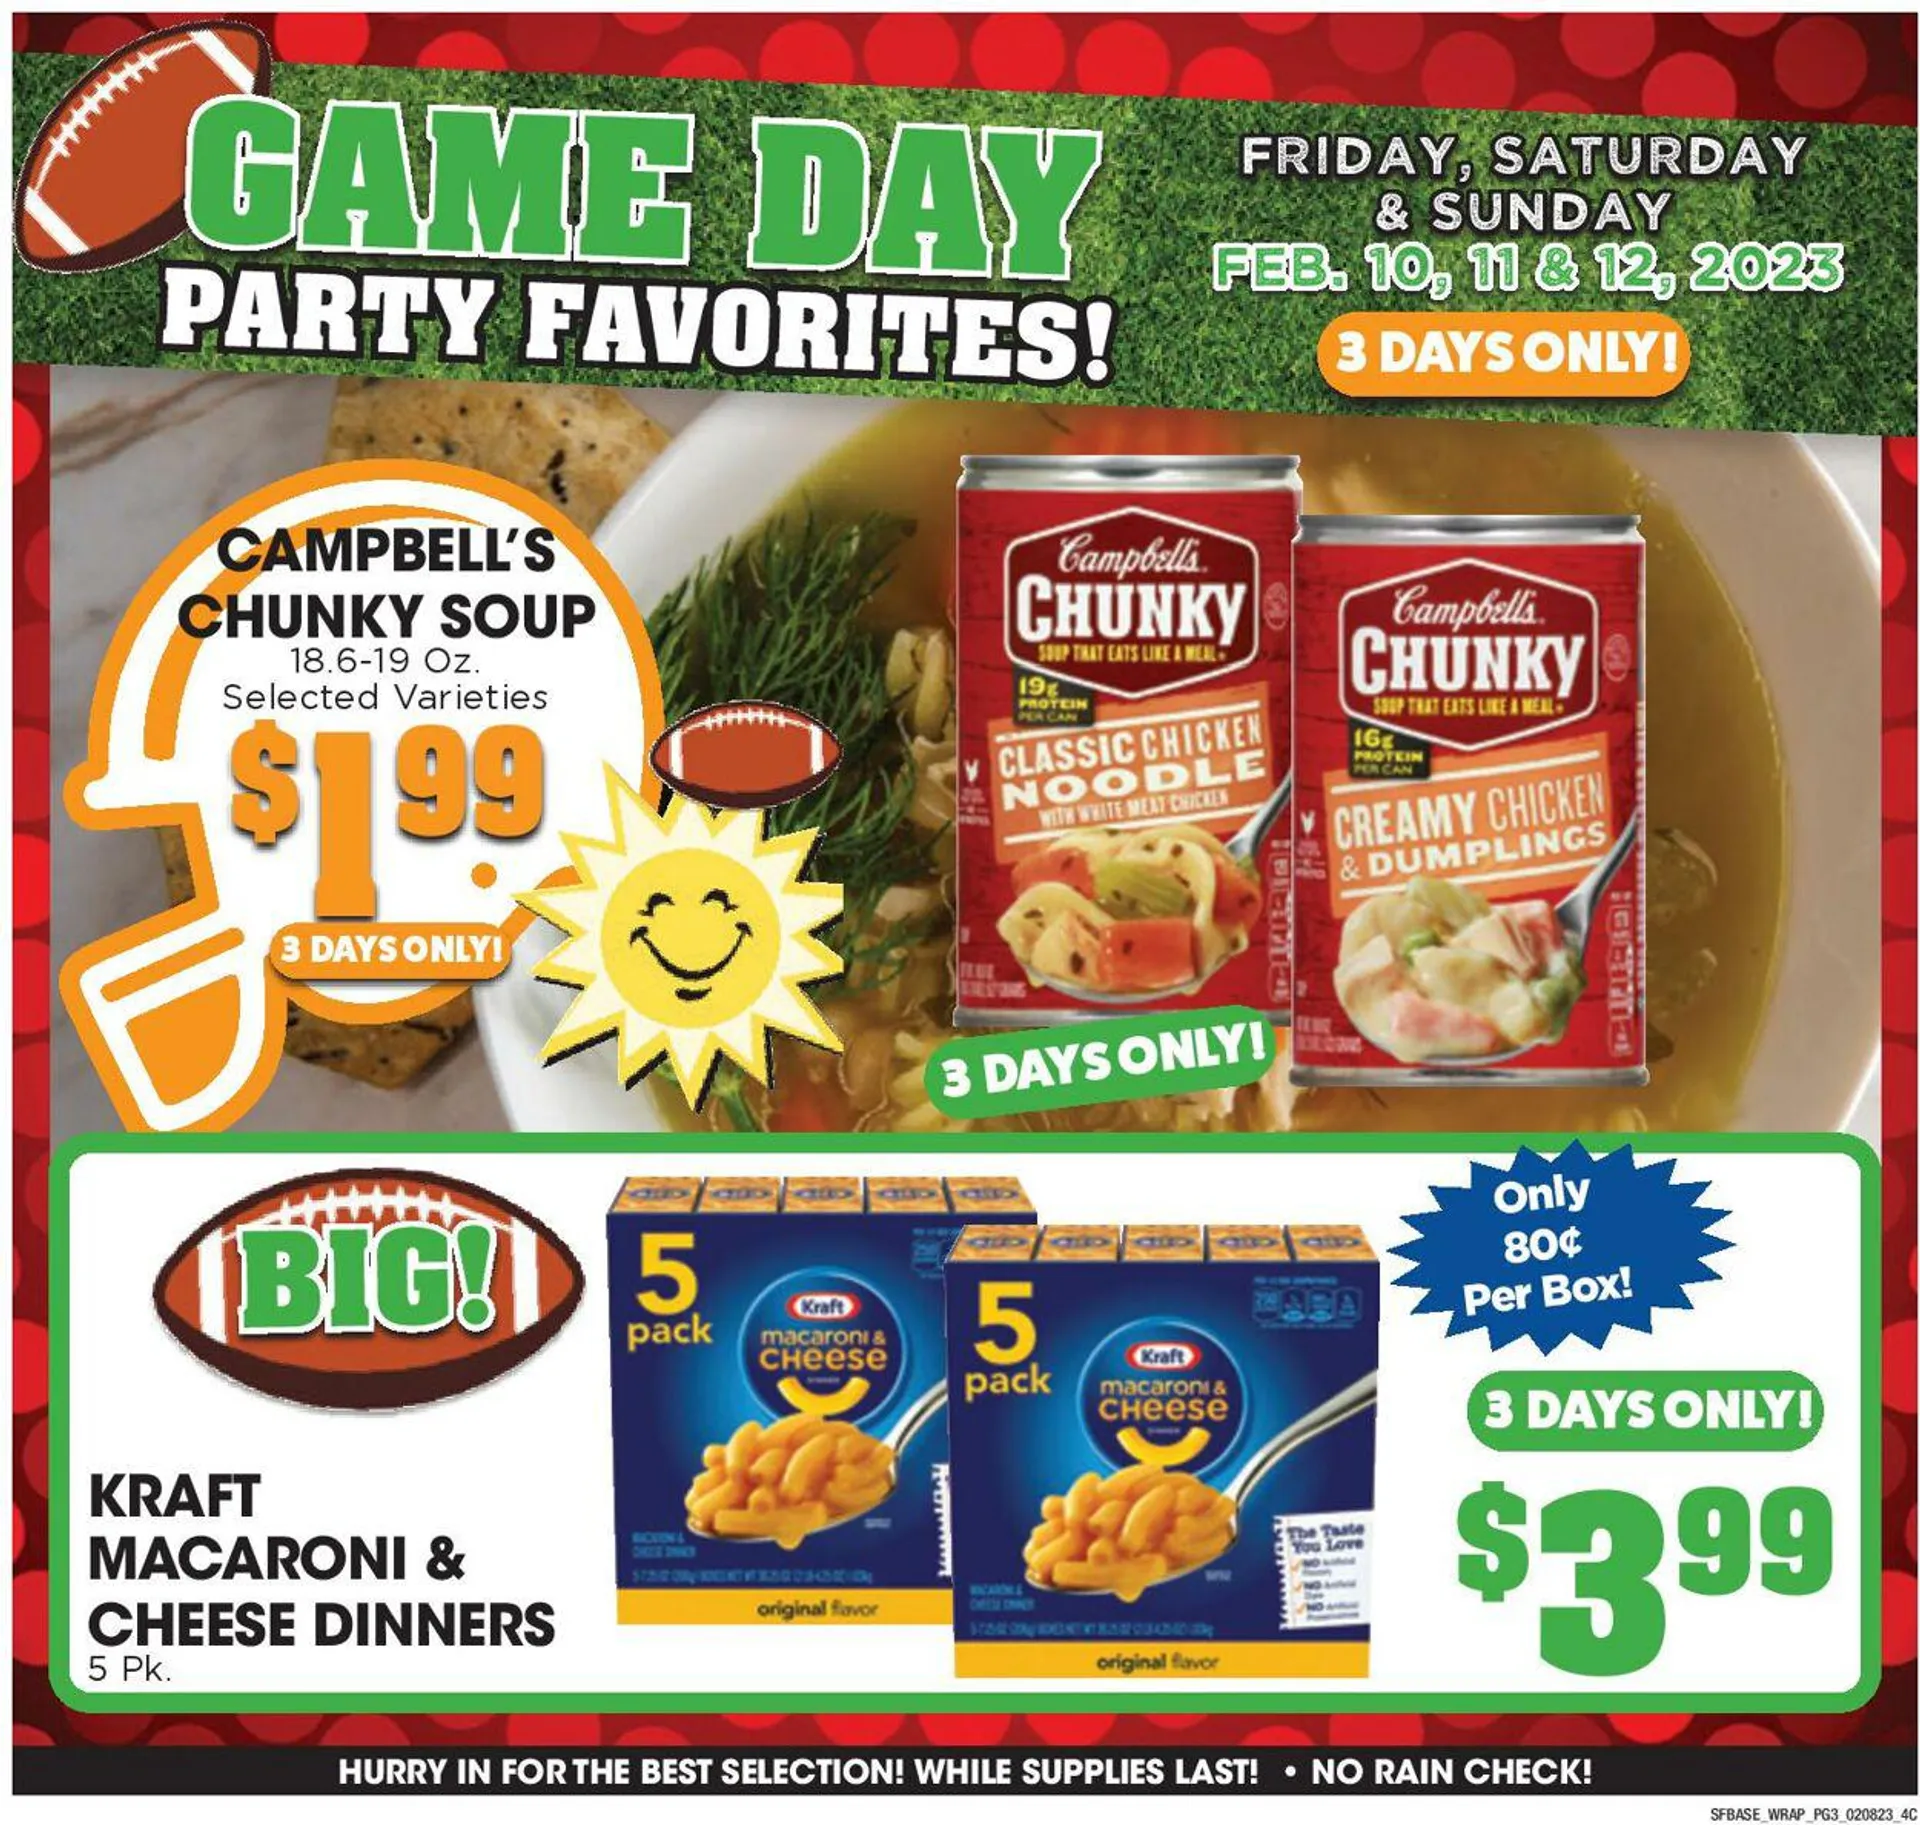 Sunshine Foods Current weekly ad - 11